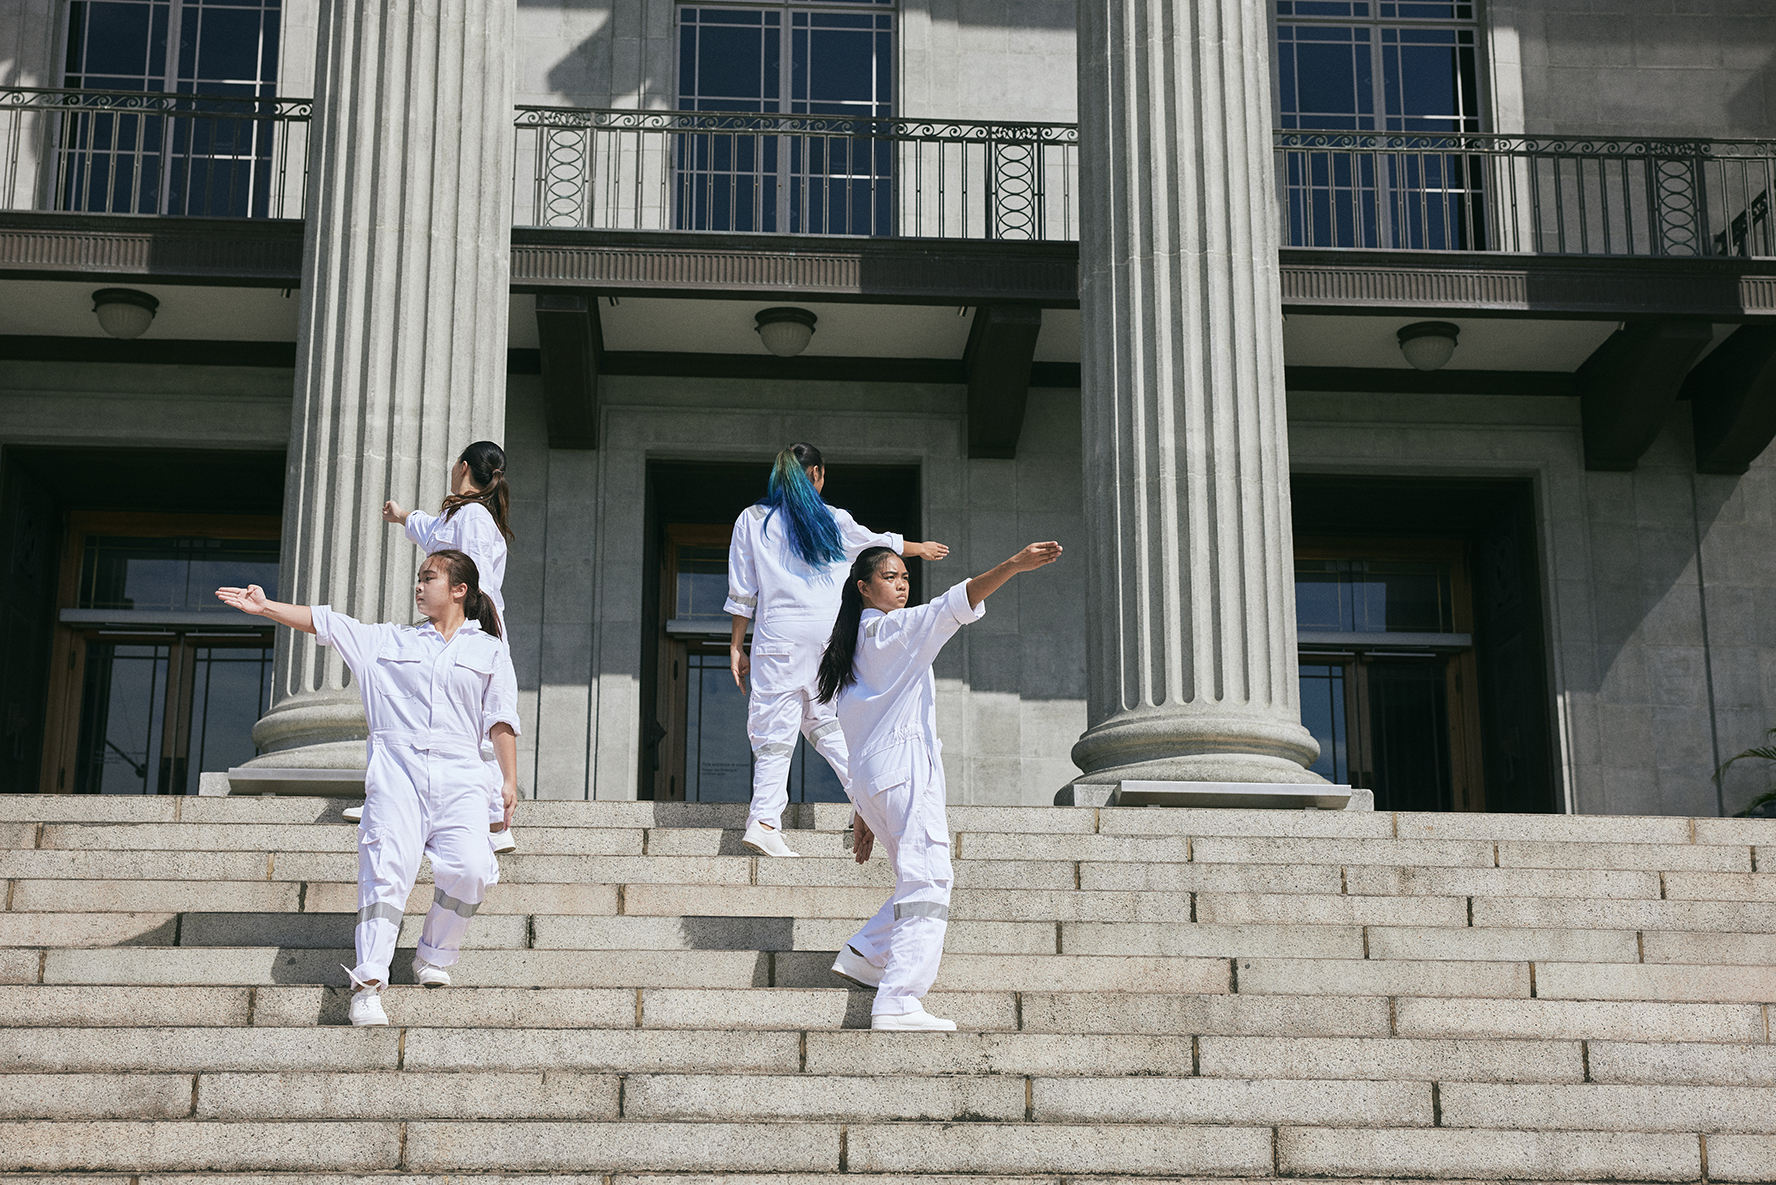 Students perform in the blazing sun on the outdoor steps of the historic City Hall building.